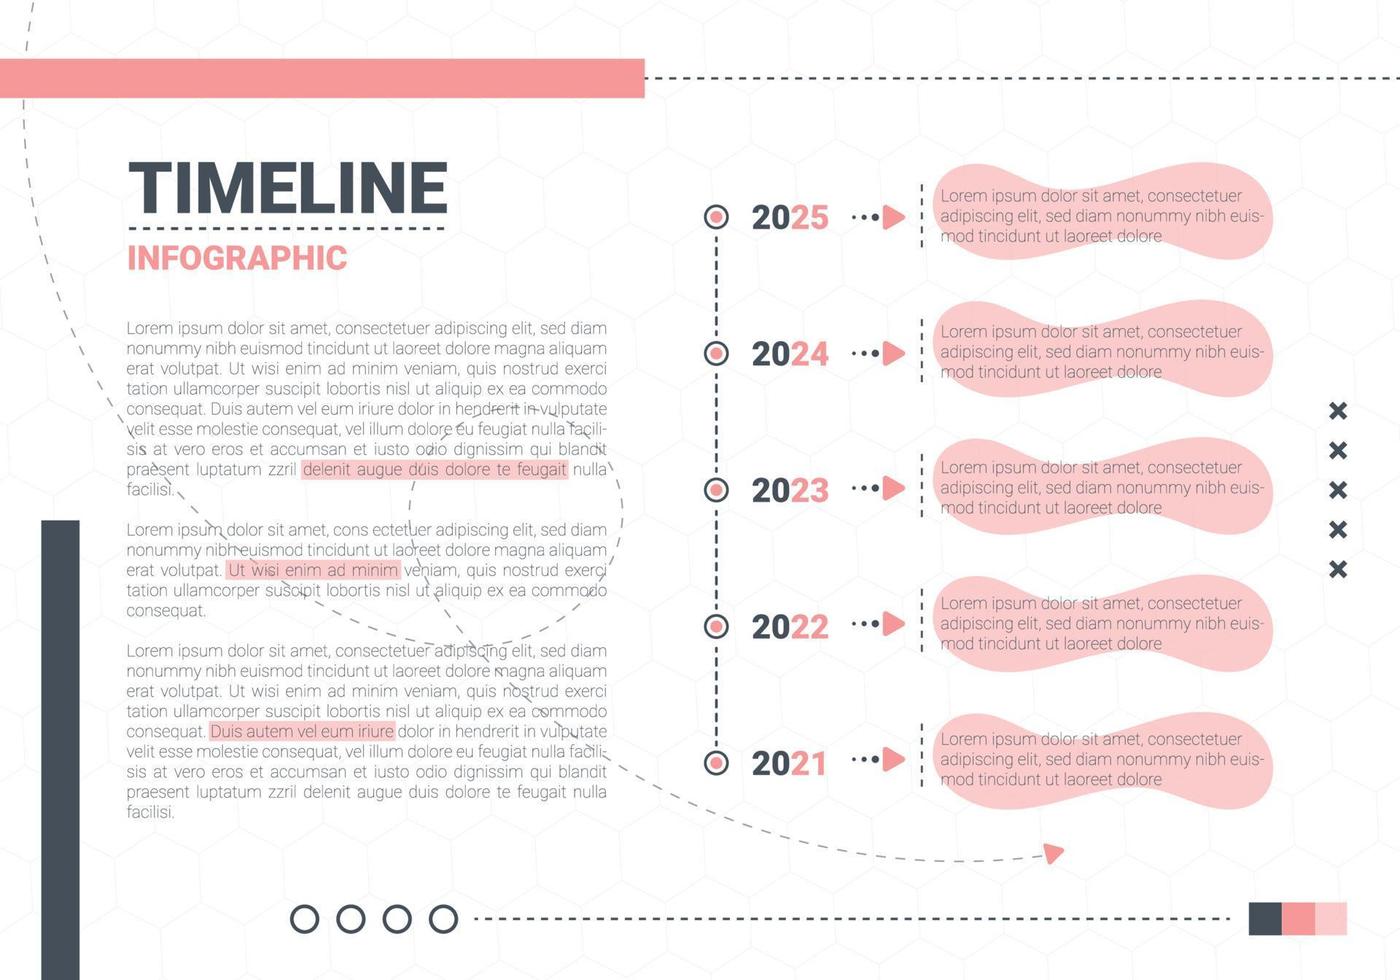 Timeline infographic 2021-2025 years periods. - Vector infographic template